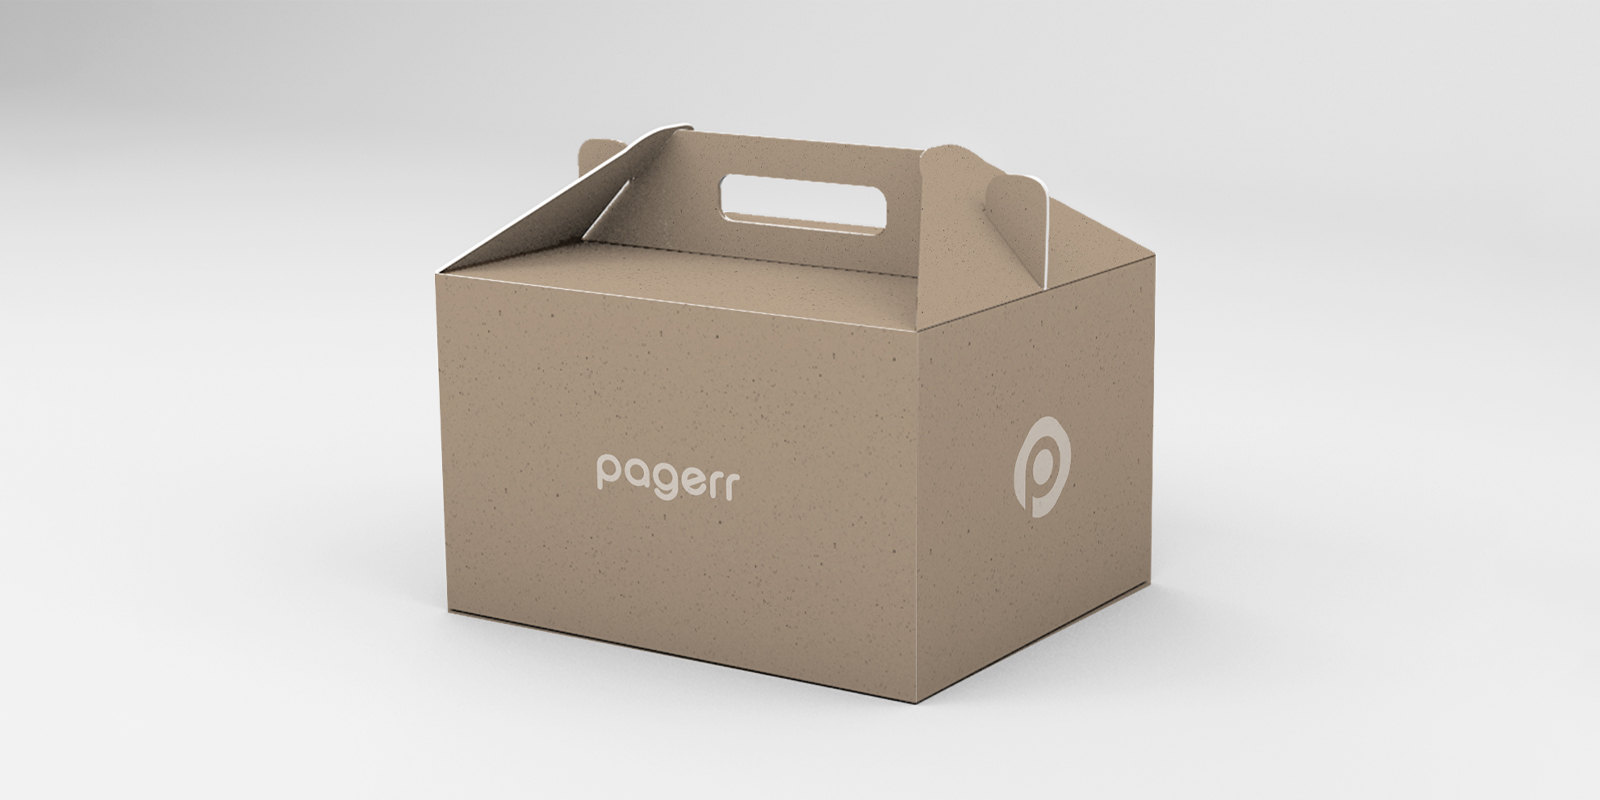 Takeaway boxes in Adelaide - Print with Pagerr